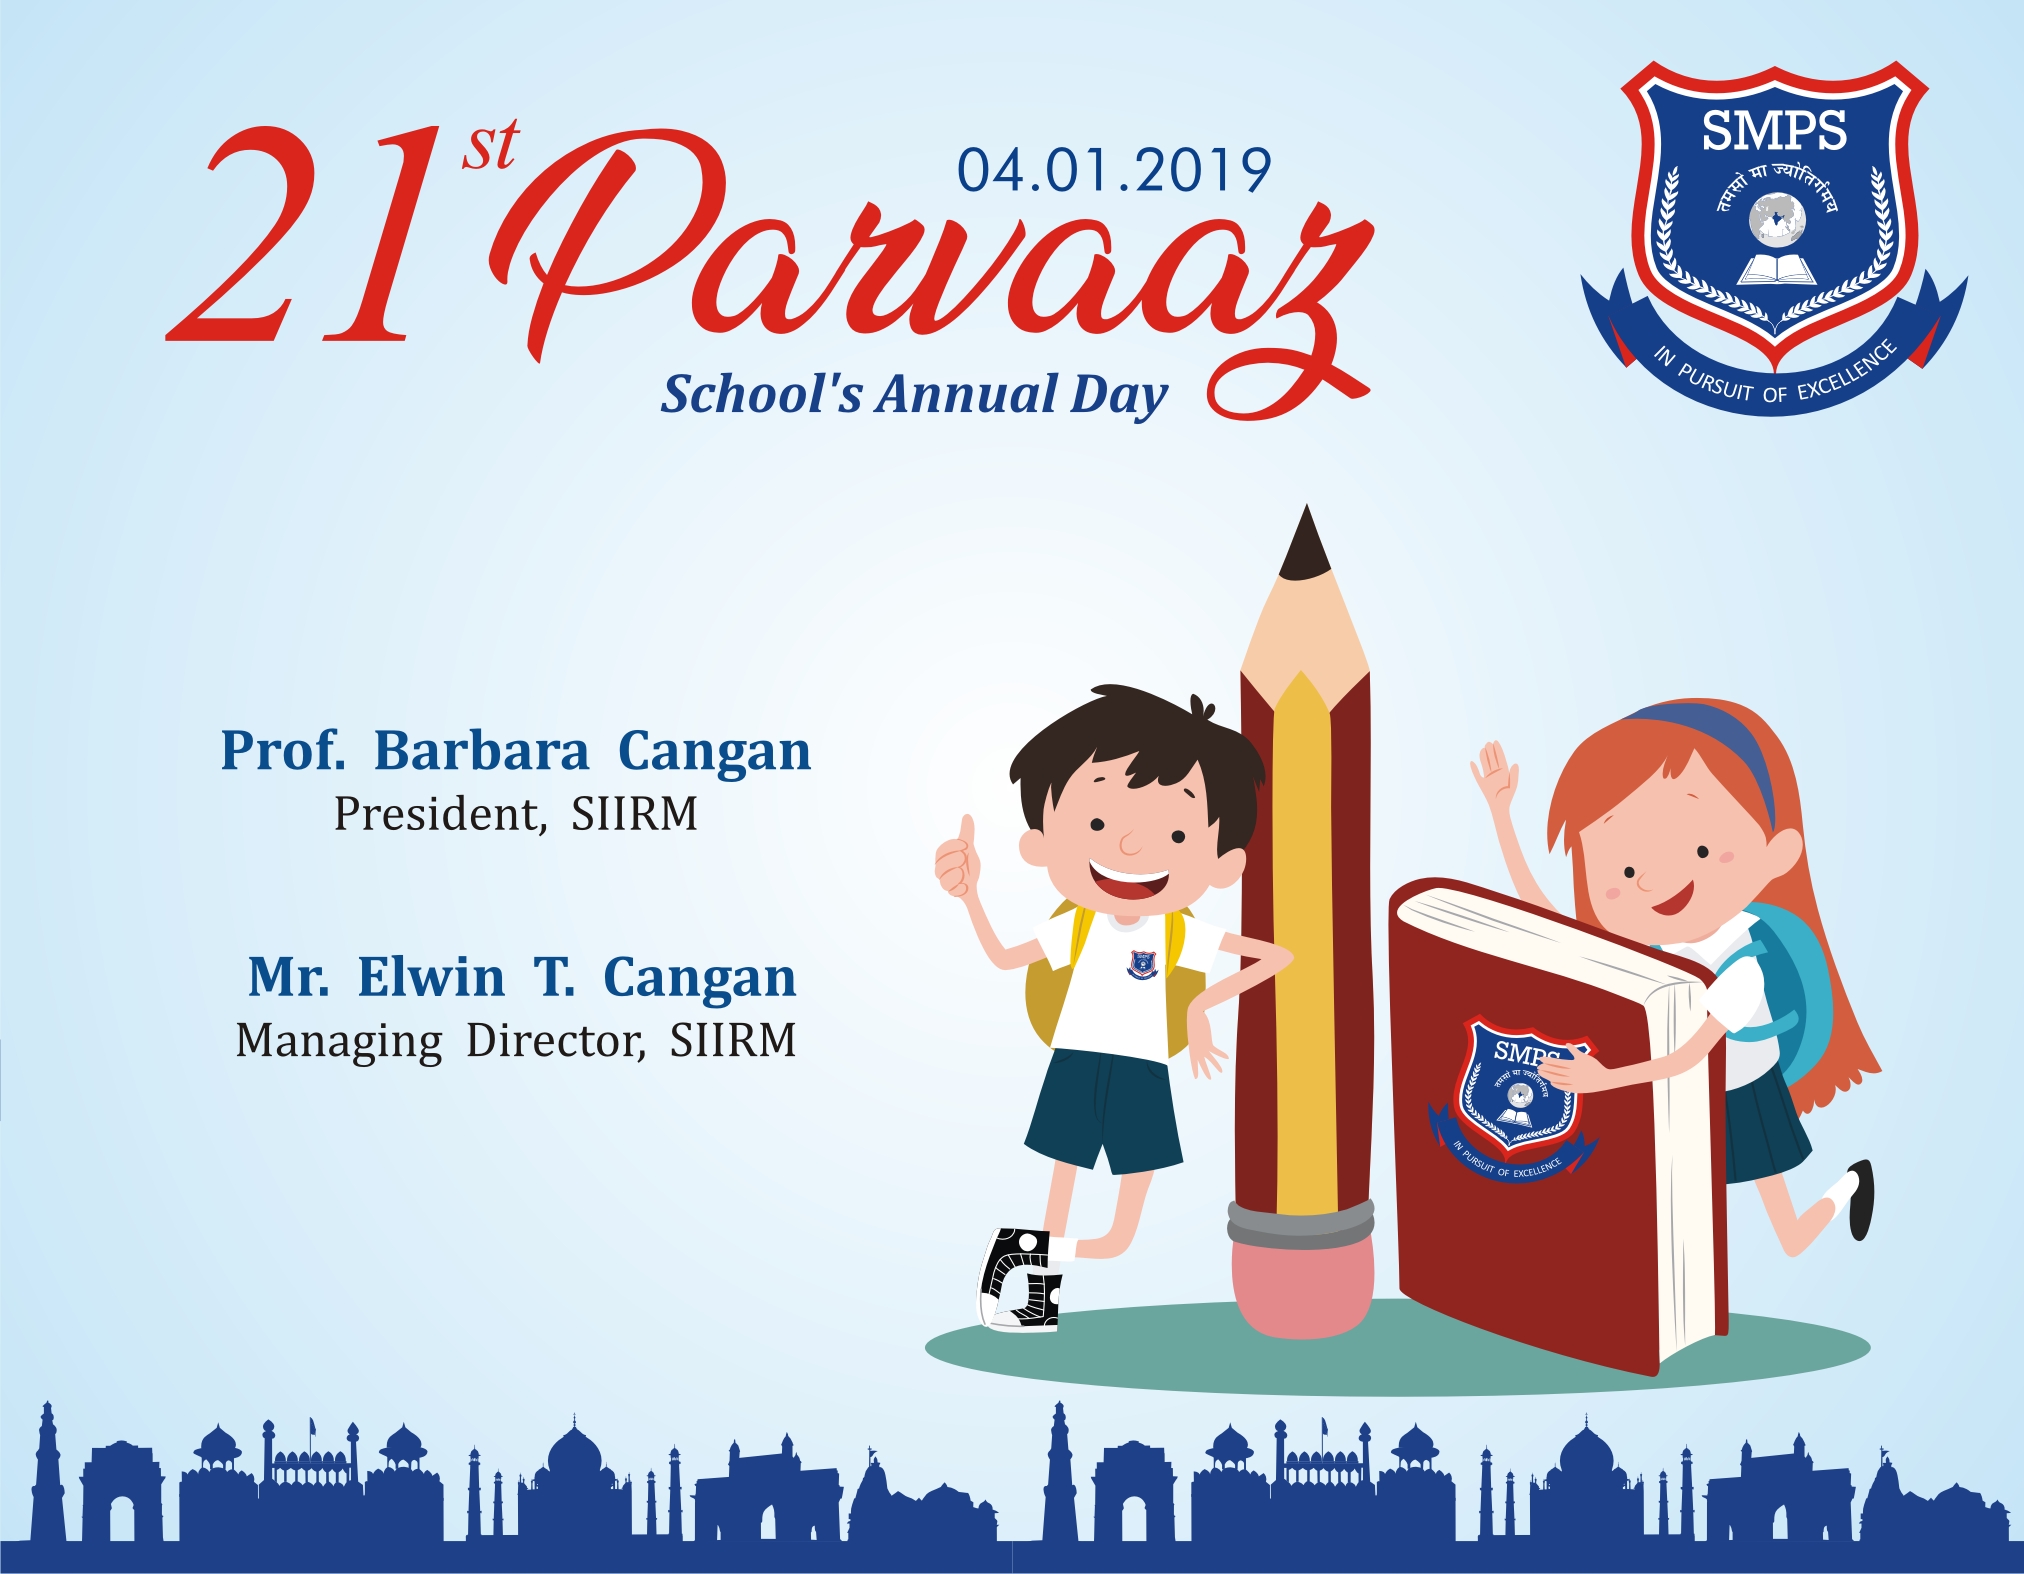 PARVAAZ 2019 - Annual Day @SMPS